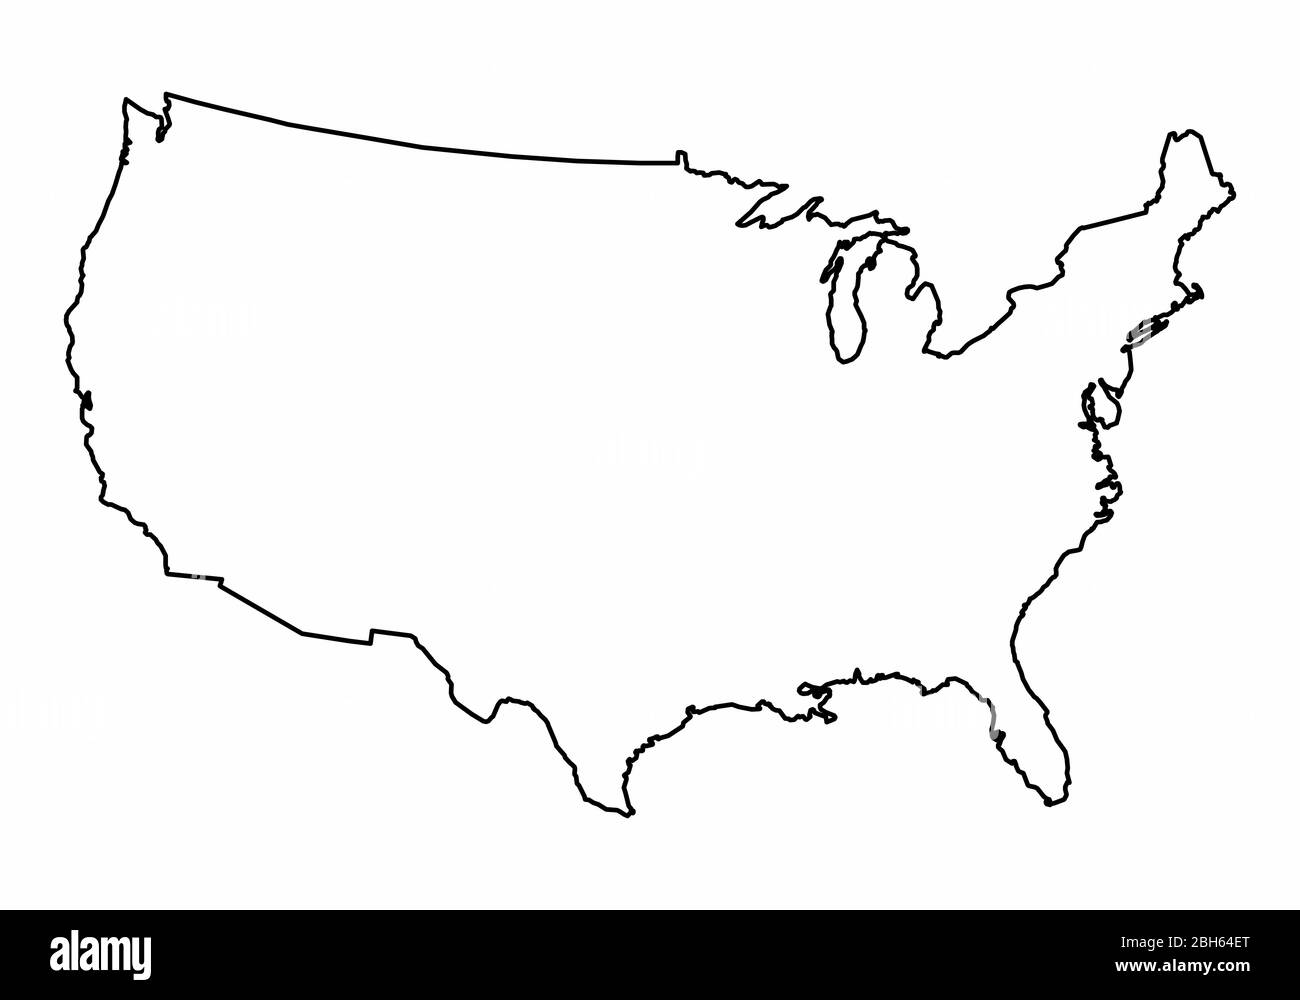 USA outline map isolated on white background Stock Vector